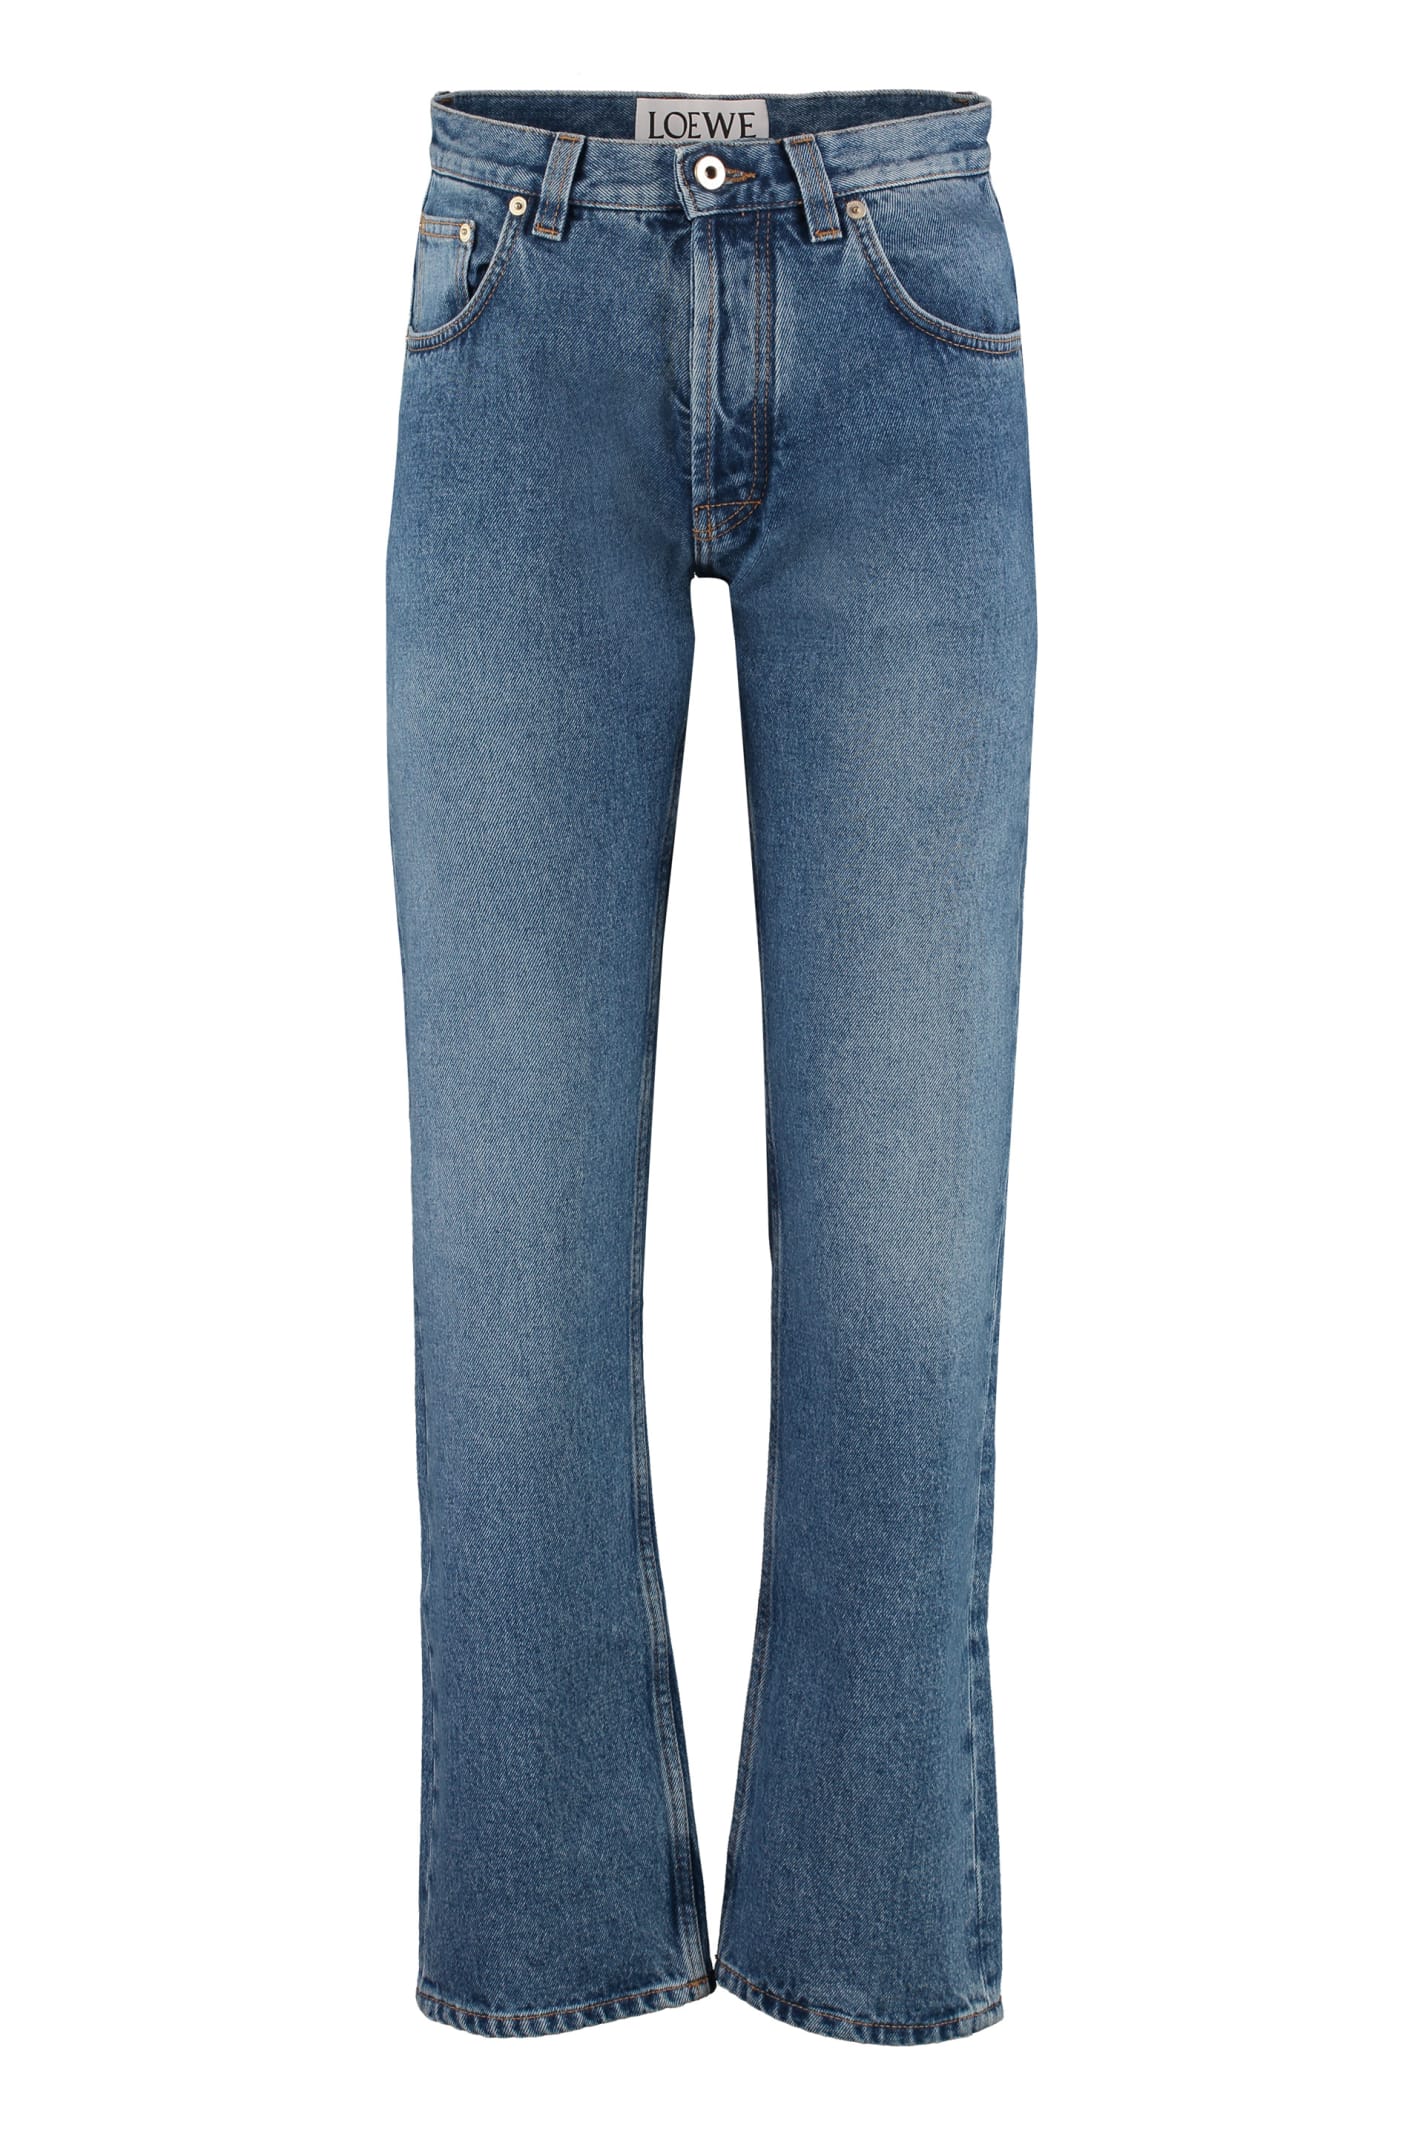 LOEWE EMBROIDERED JEANS,S2102420IBJEANSFLOWEREMBROIDERY 6395